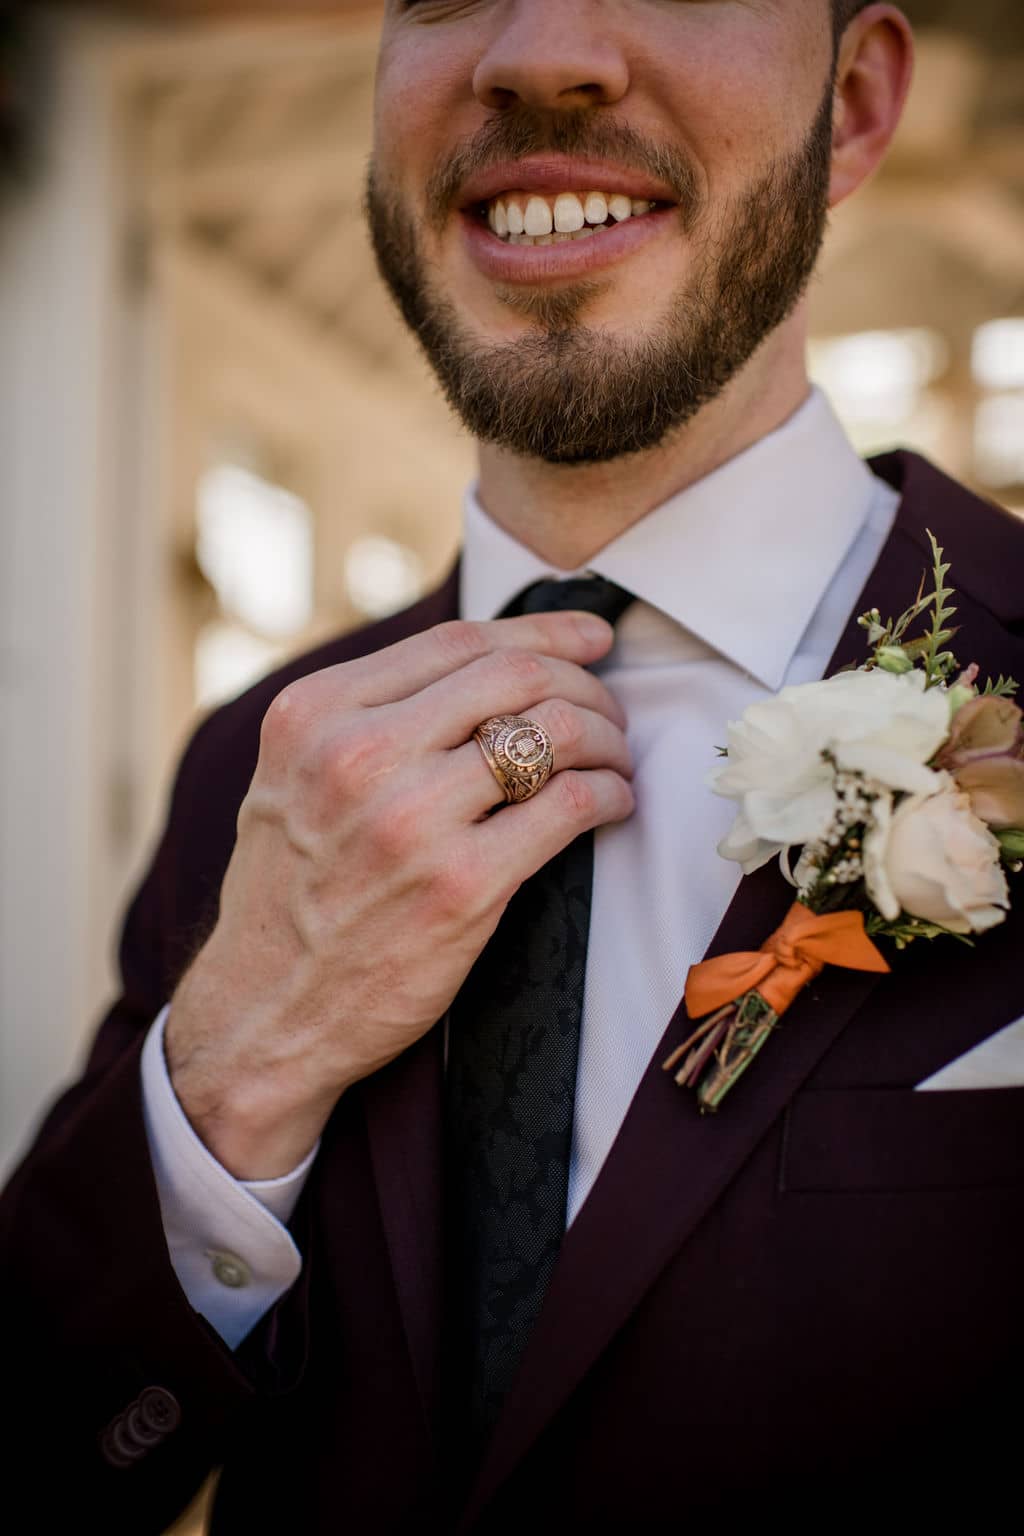 a close up of the groom adjusting his tie